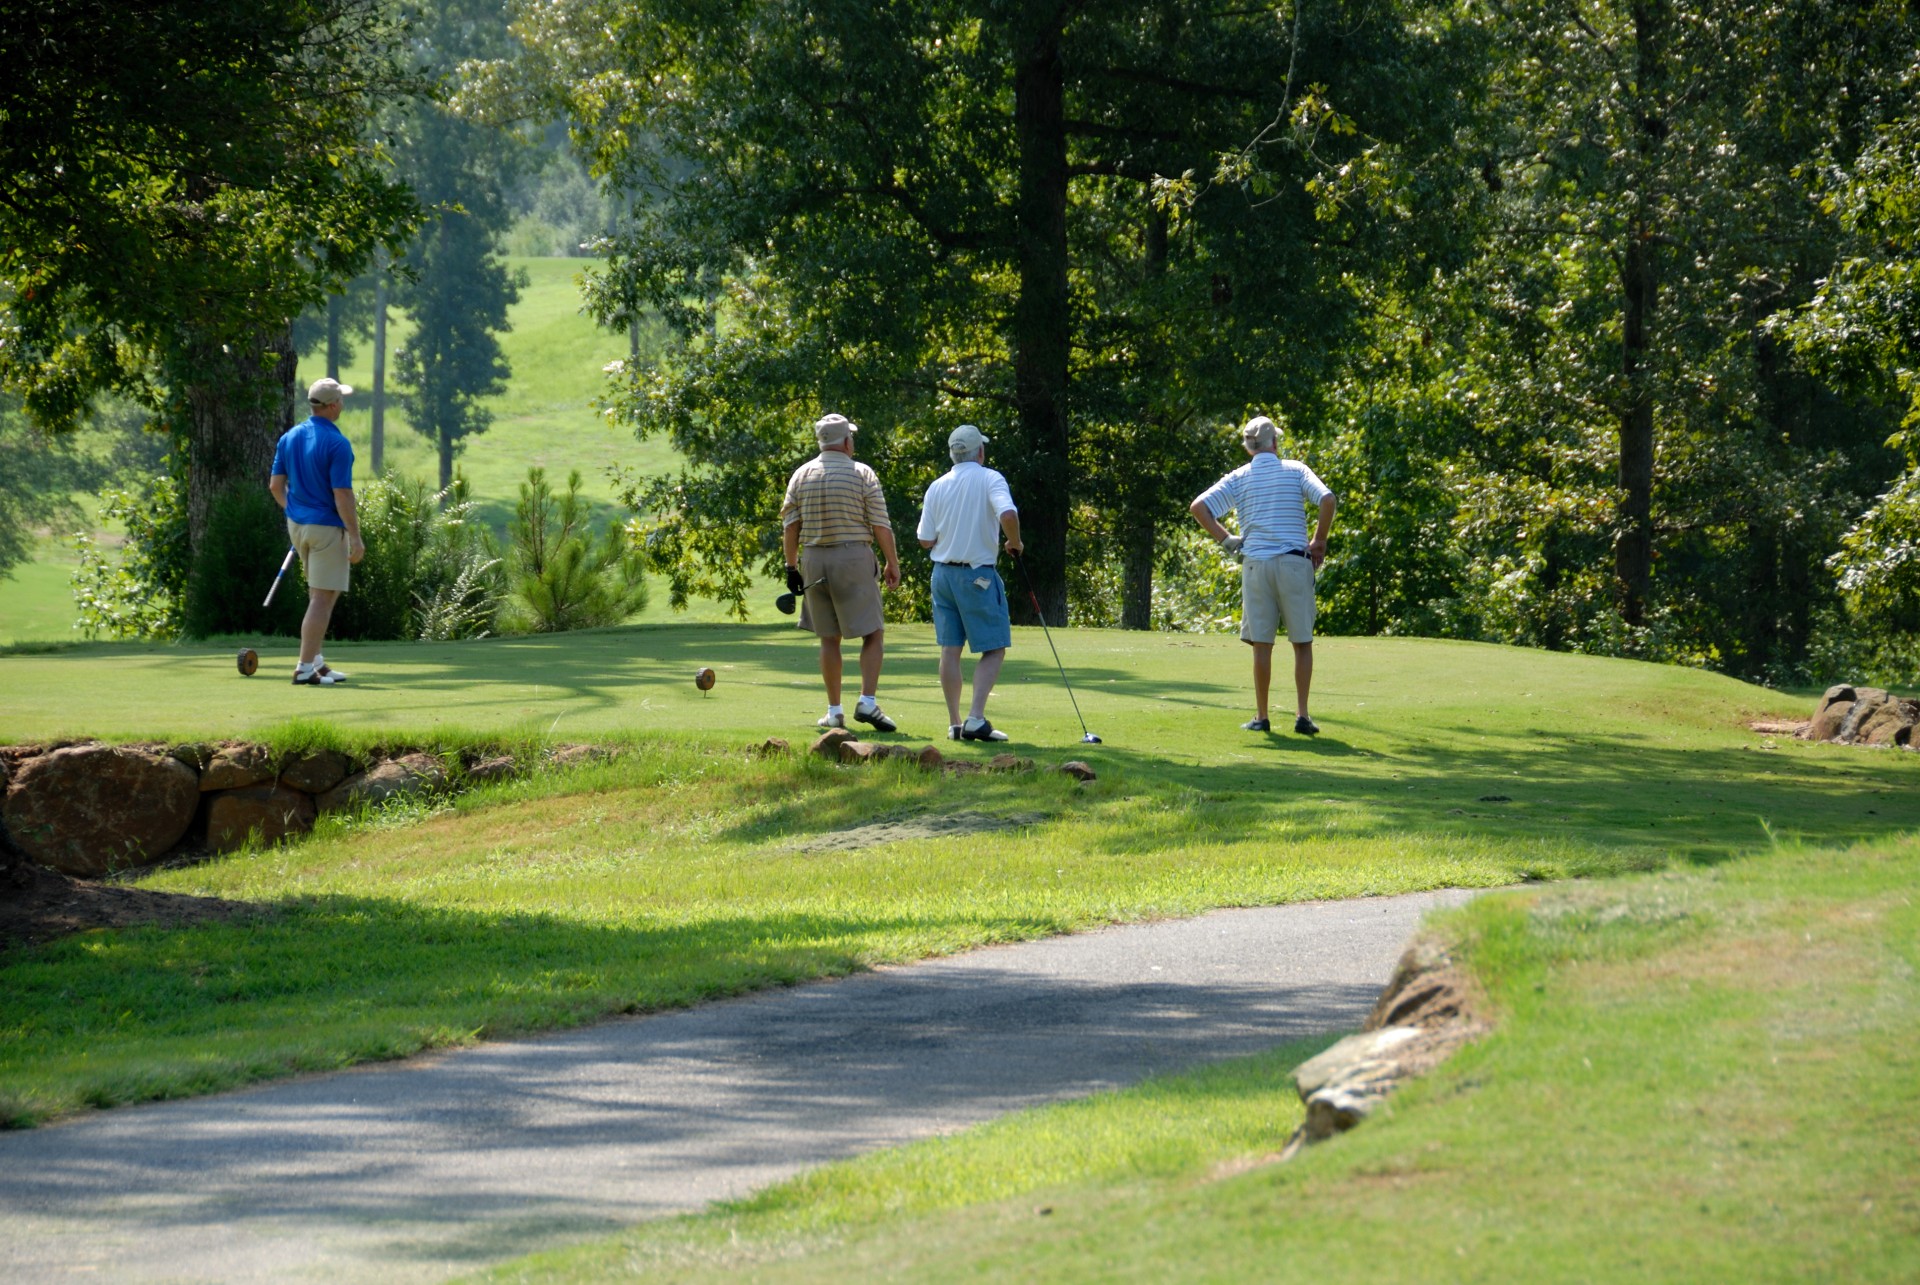 Golfers at golf course tee off